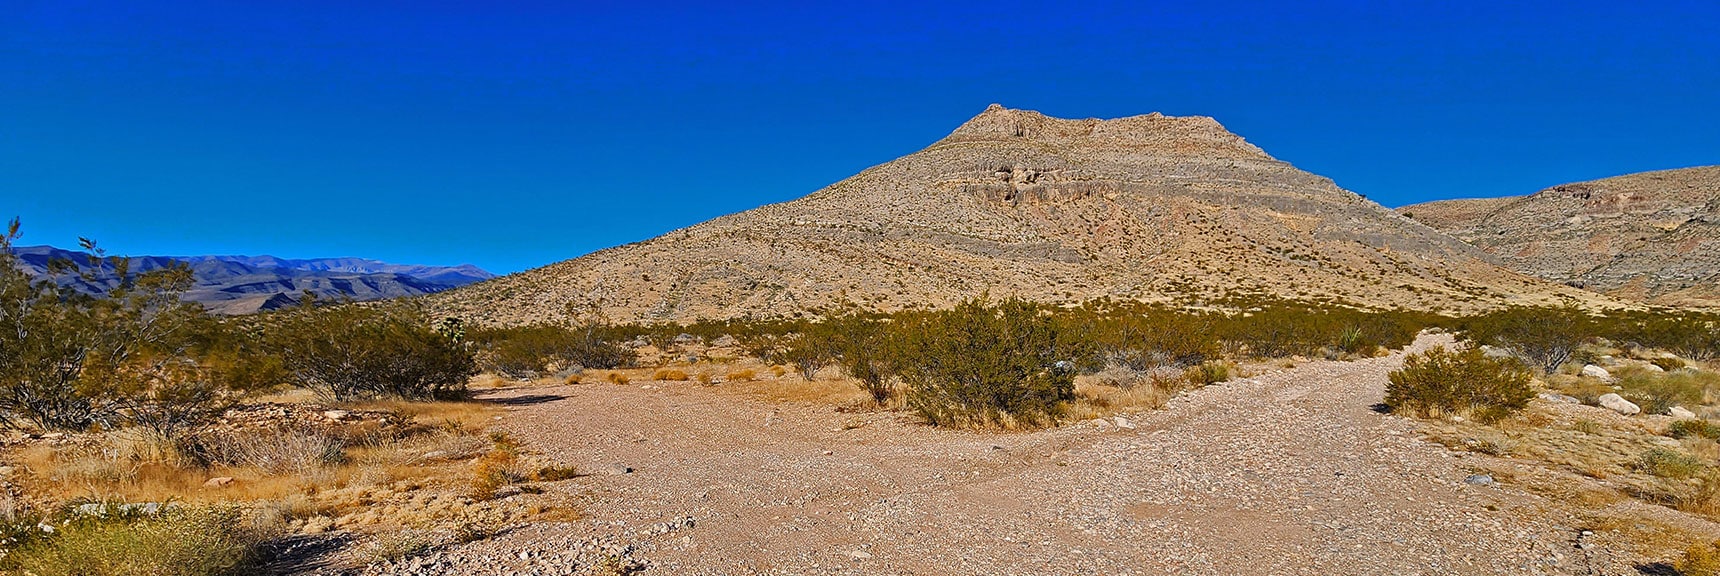 Westside Road Divide. Right Toward Next Canyon, Left Continues North, Connects with CC Spring Rd. | Landmark Bluff | Lovell Canyon, Nevada